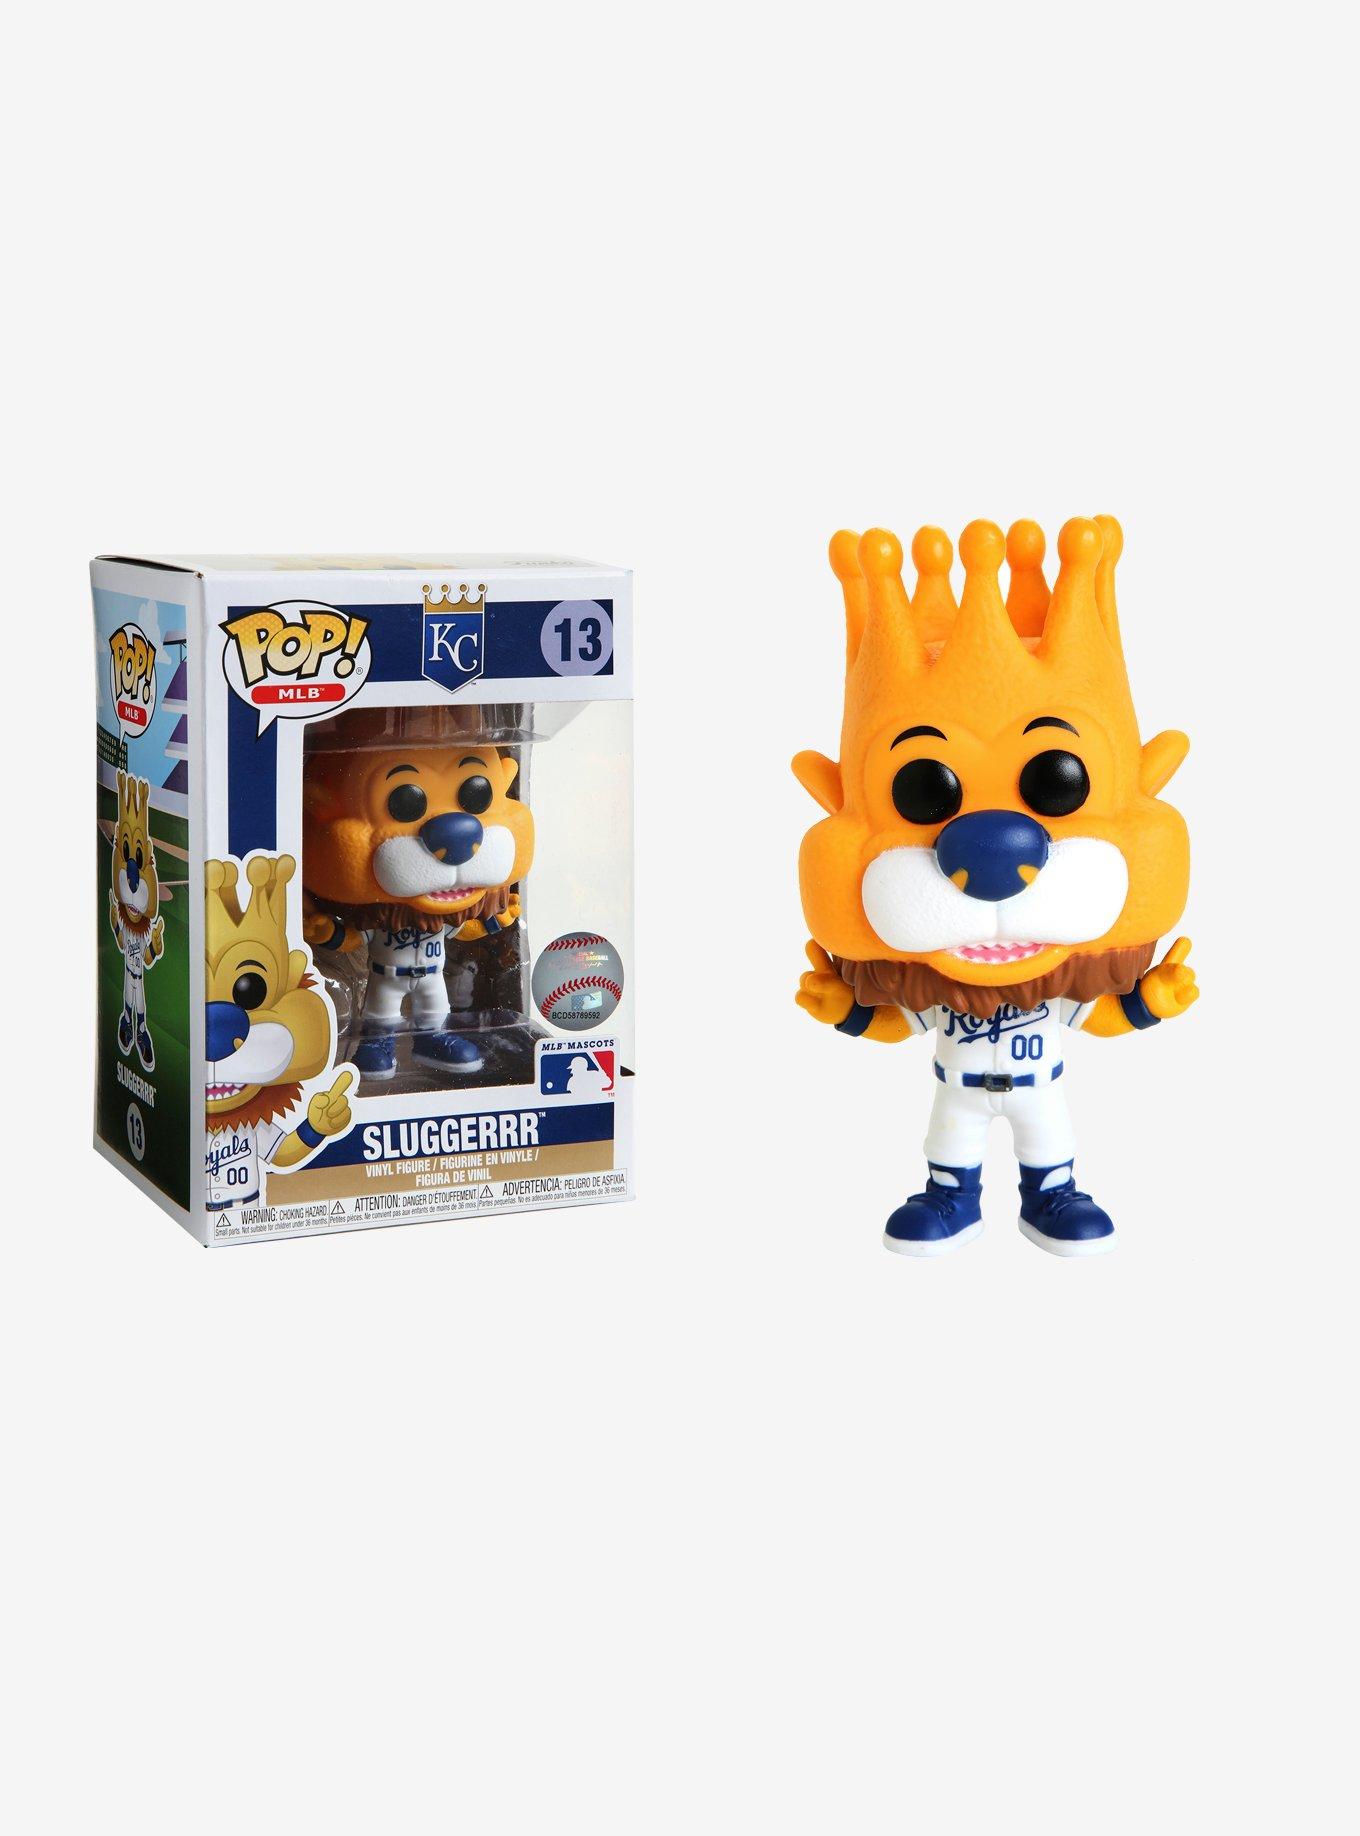 Kansas City Royals Baby Groot And Grinch Best Friends Ugly